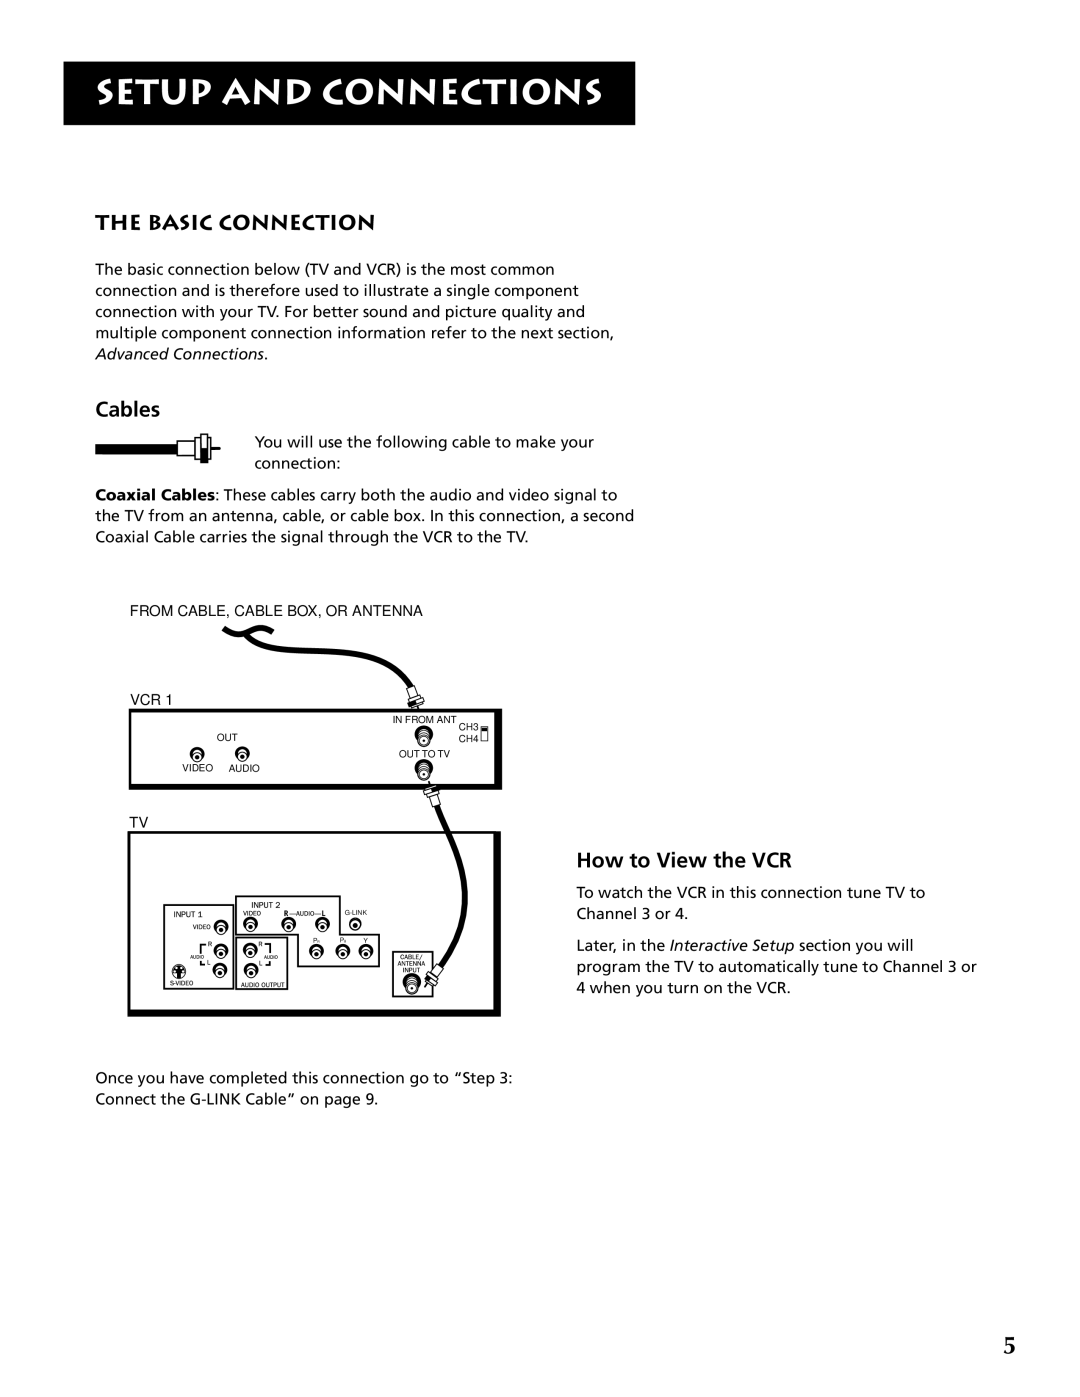 RCA F32691 The Basic Connection, How to View the VCR, Setup And Connections, Cables, From Cable, Cable Box, Or Antenna Vcr 